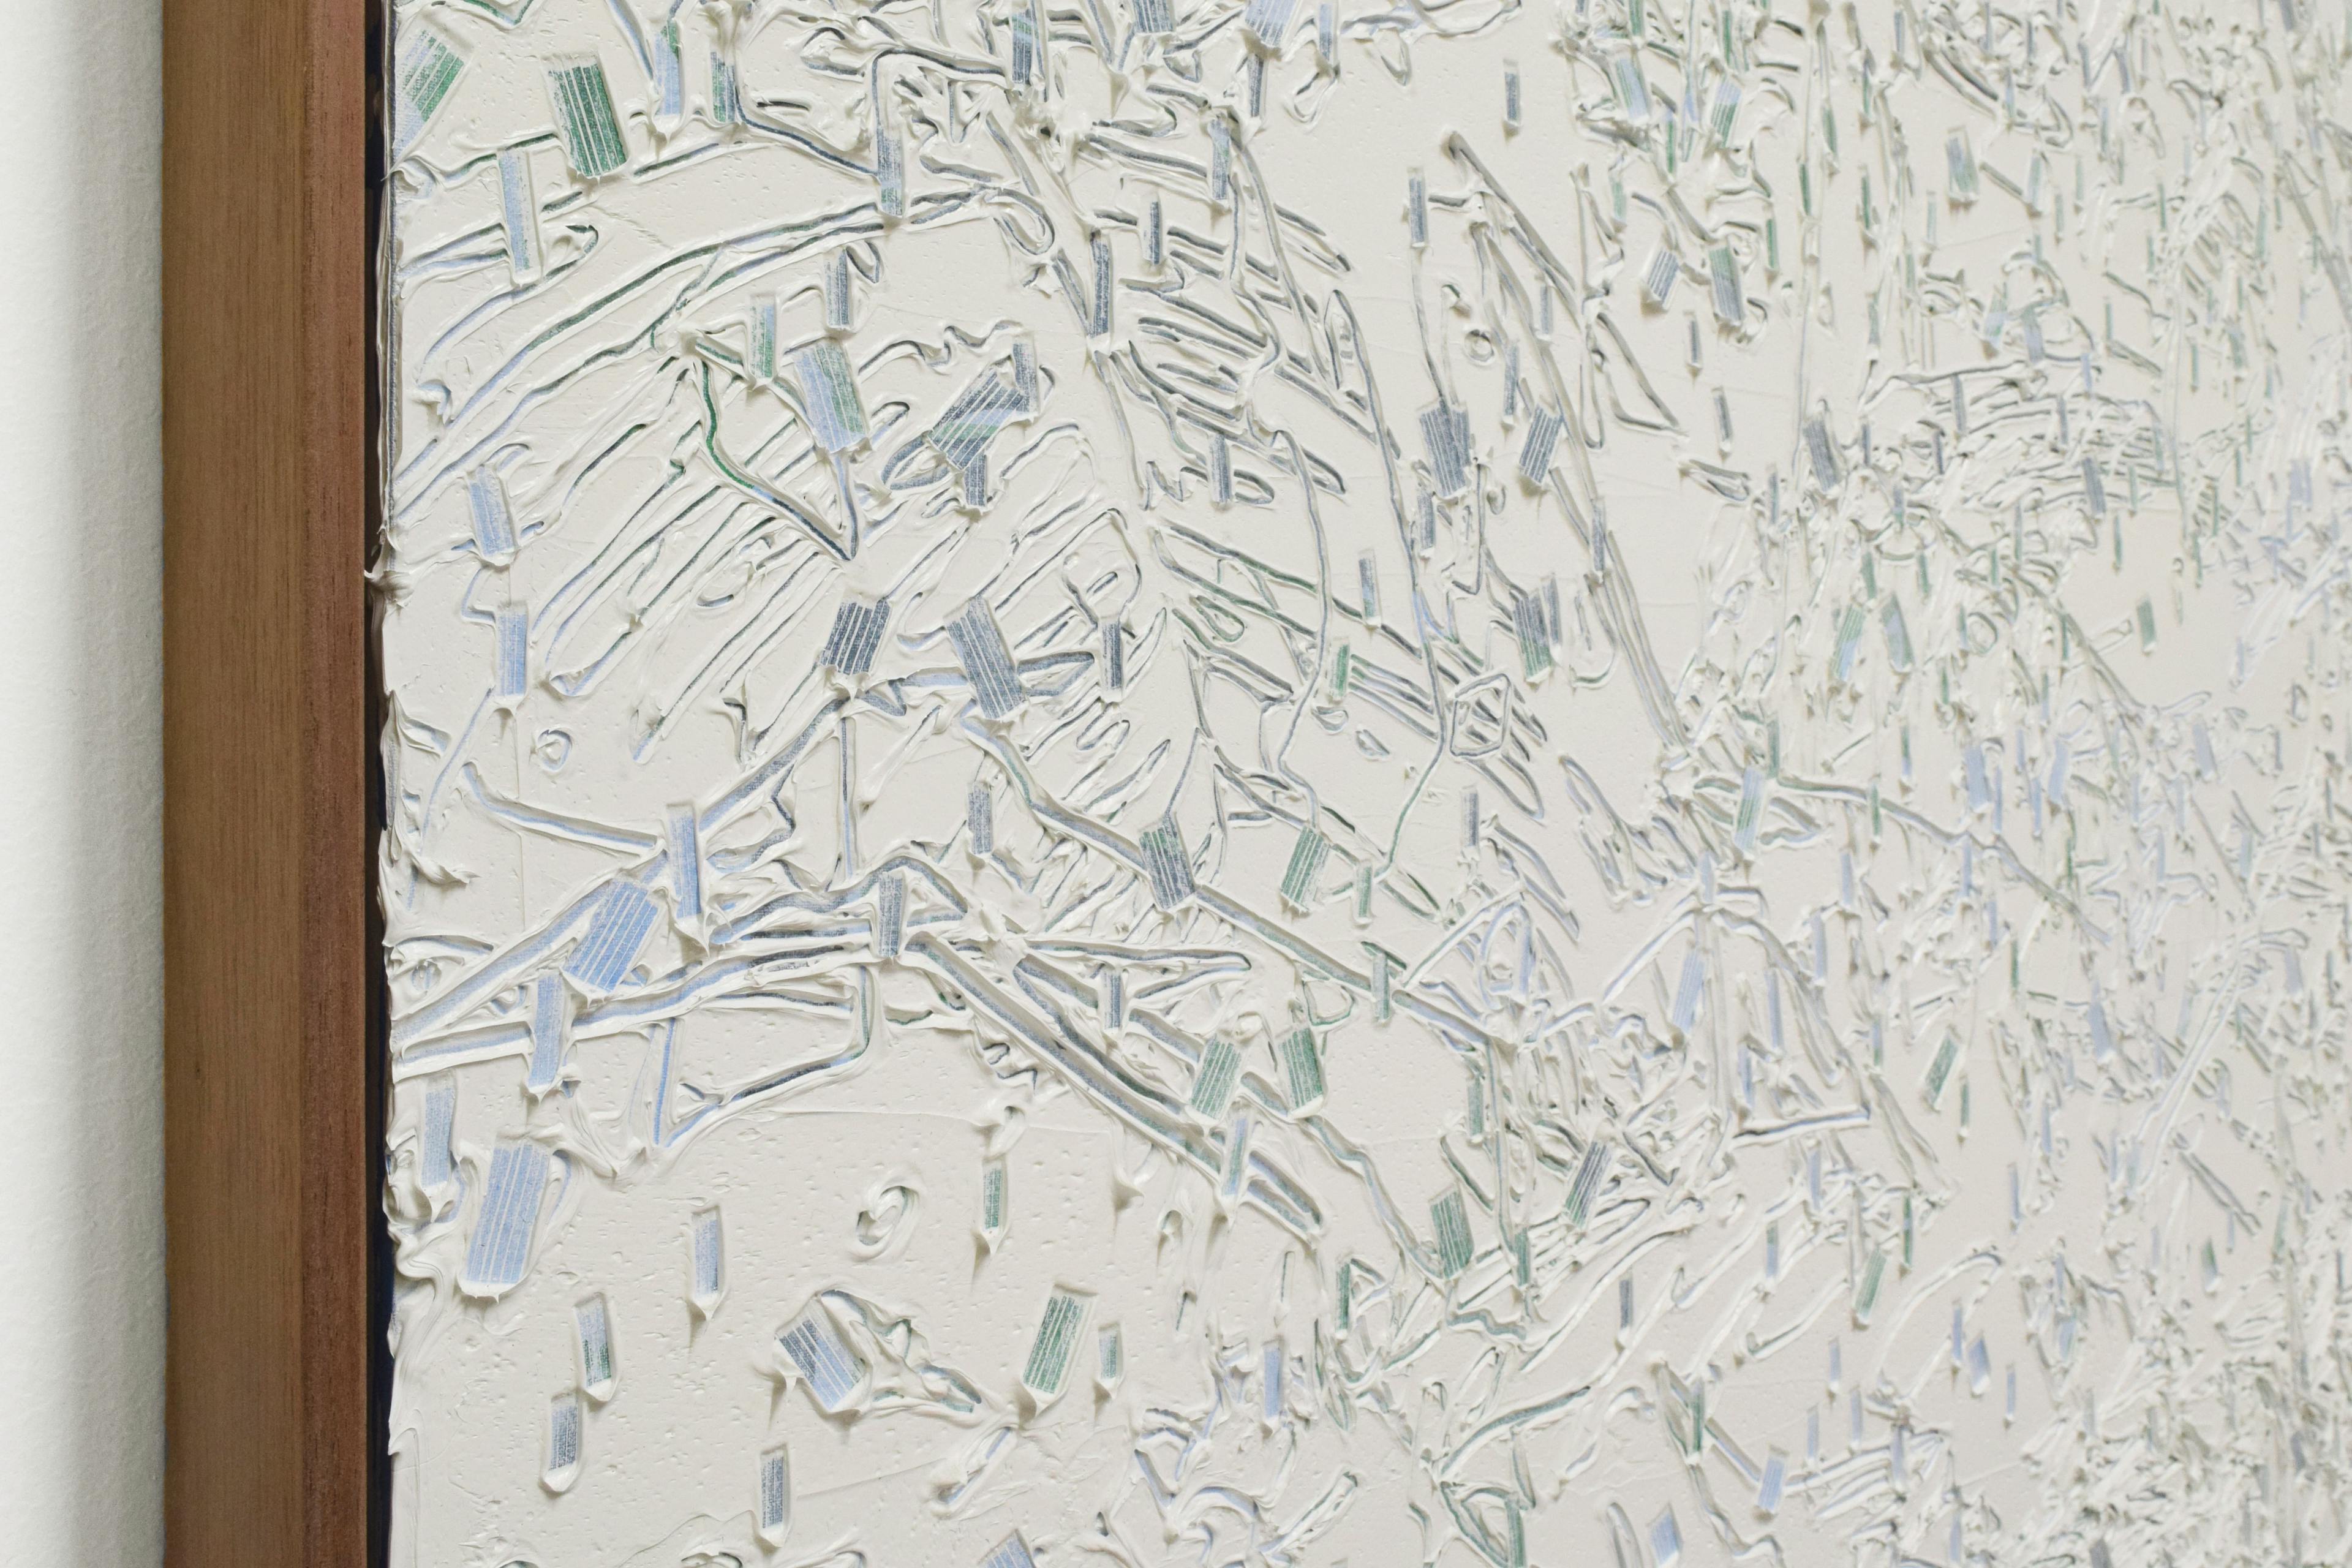 A close-up of a textured work by artist Blake Aaseby with blue and green lines carved into thick layers of gray paint.